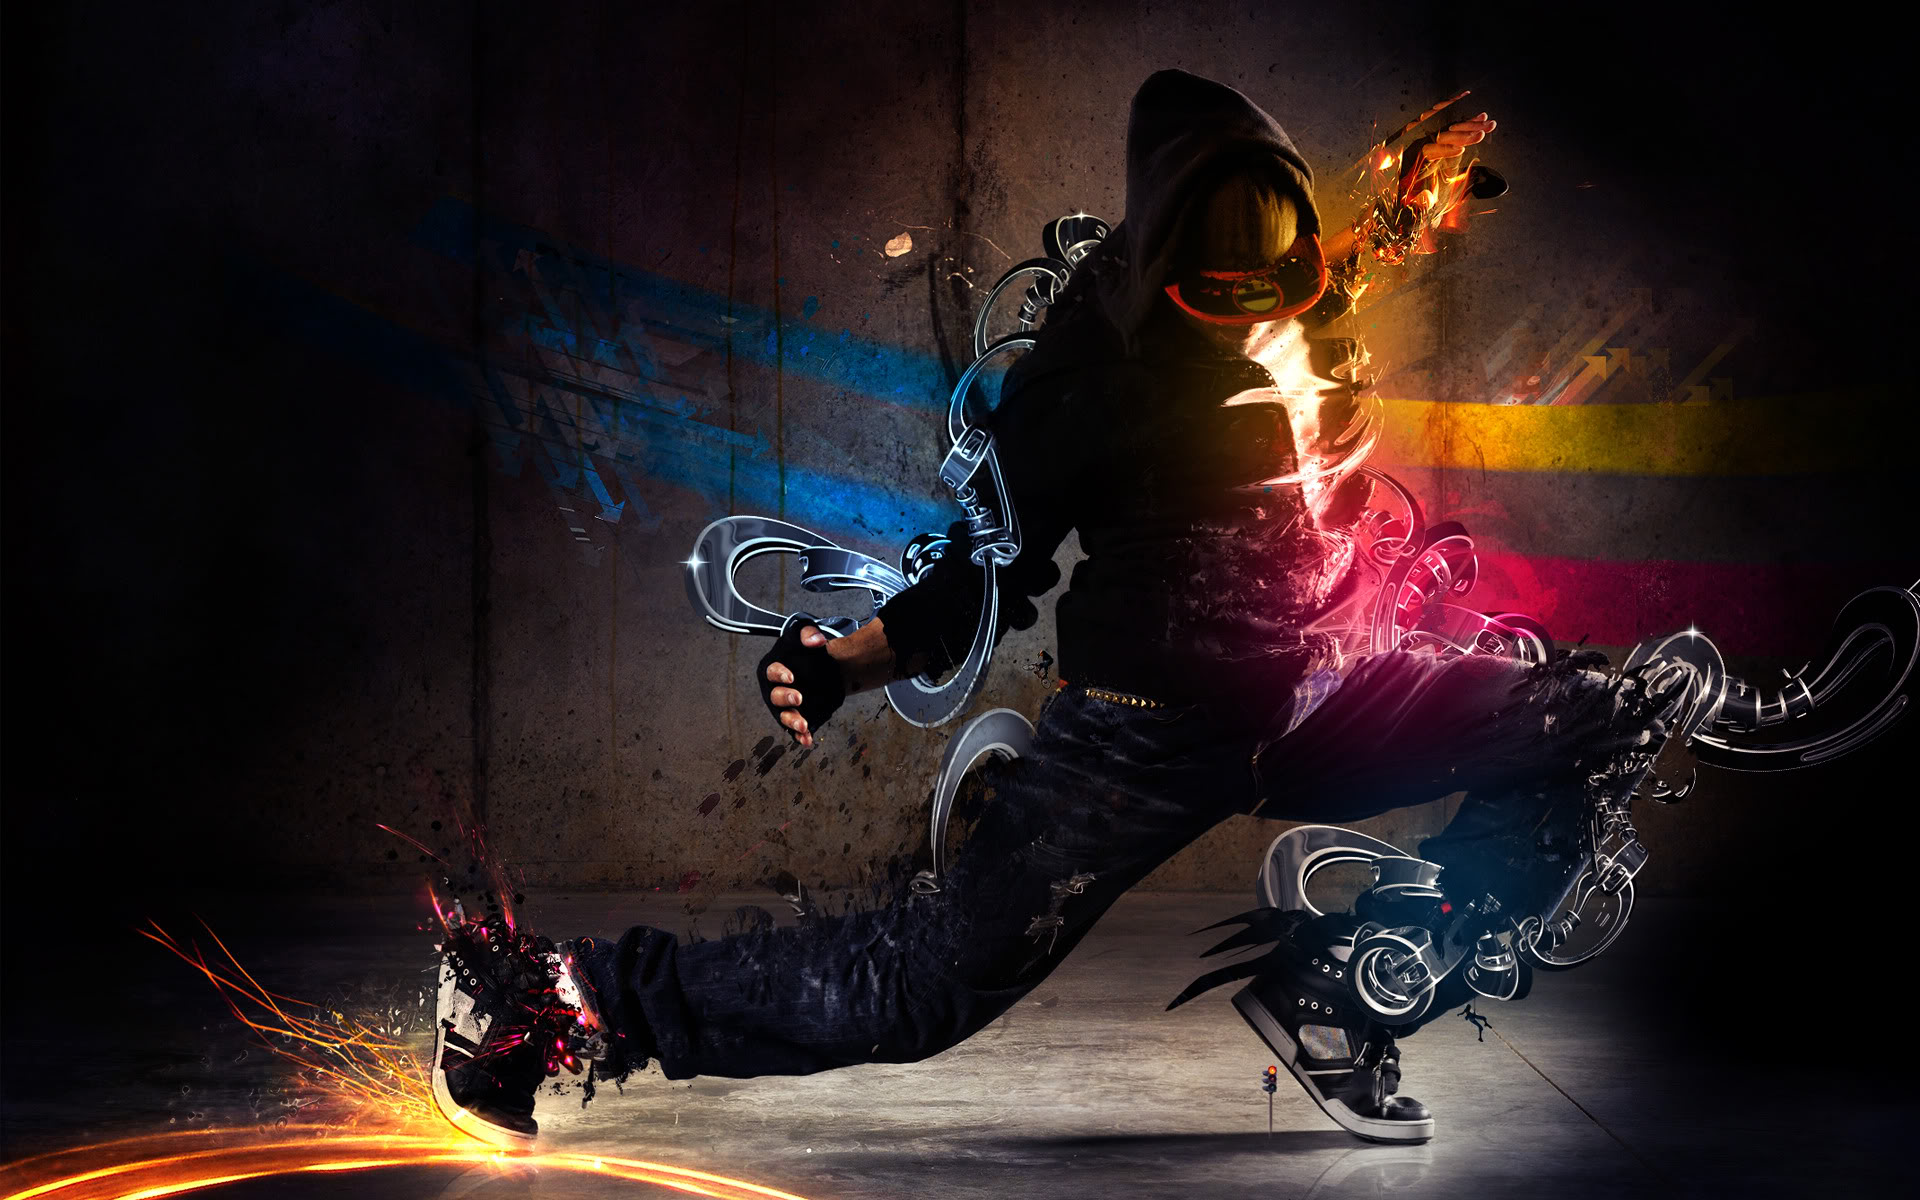 Cool HD Wallpaper For Boys Break Dance Pictures In High